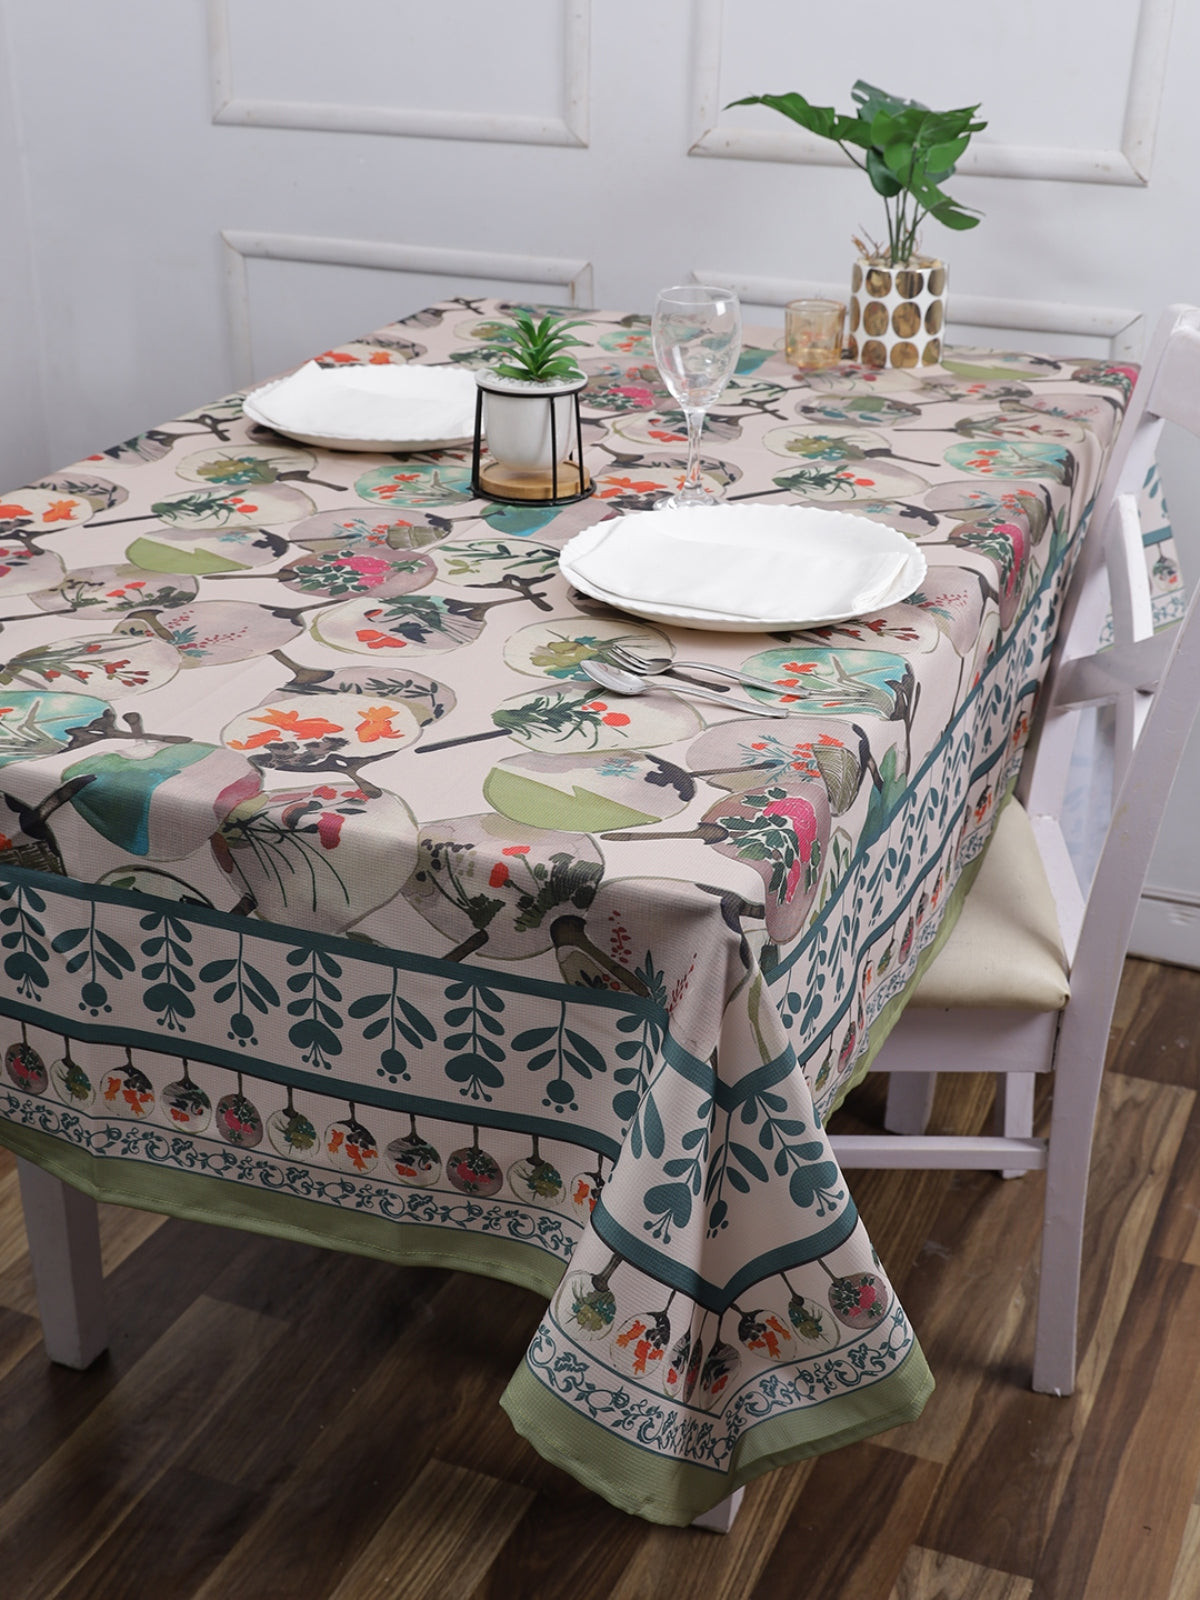 Polyester Floral Printed Dining Table Cover Cloth 60x90 Inch - Beige & Green